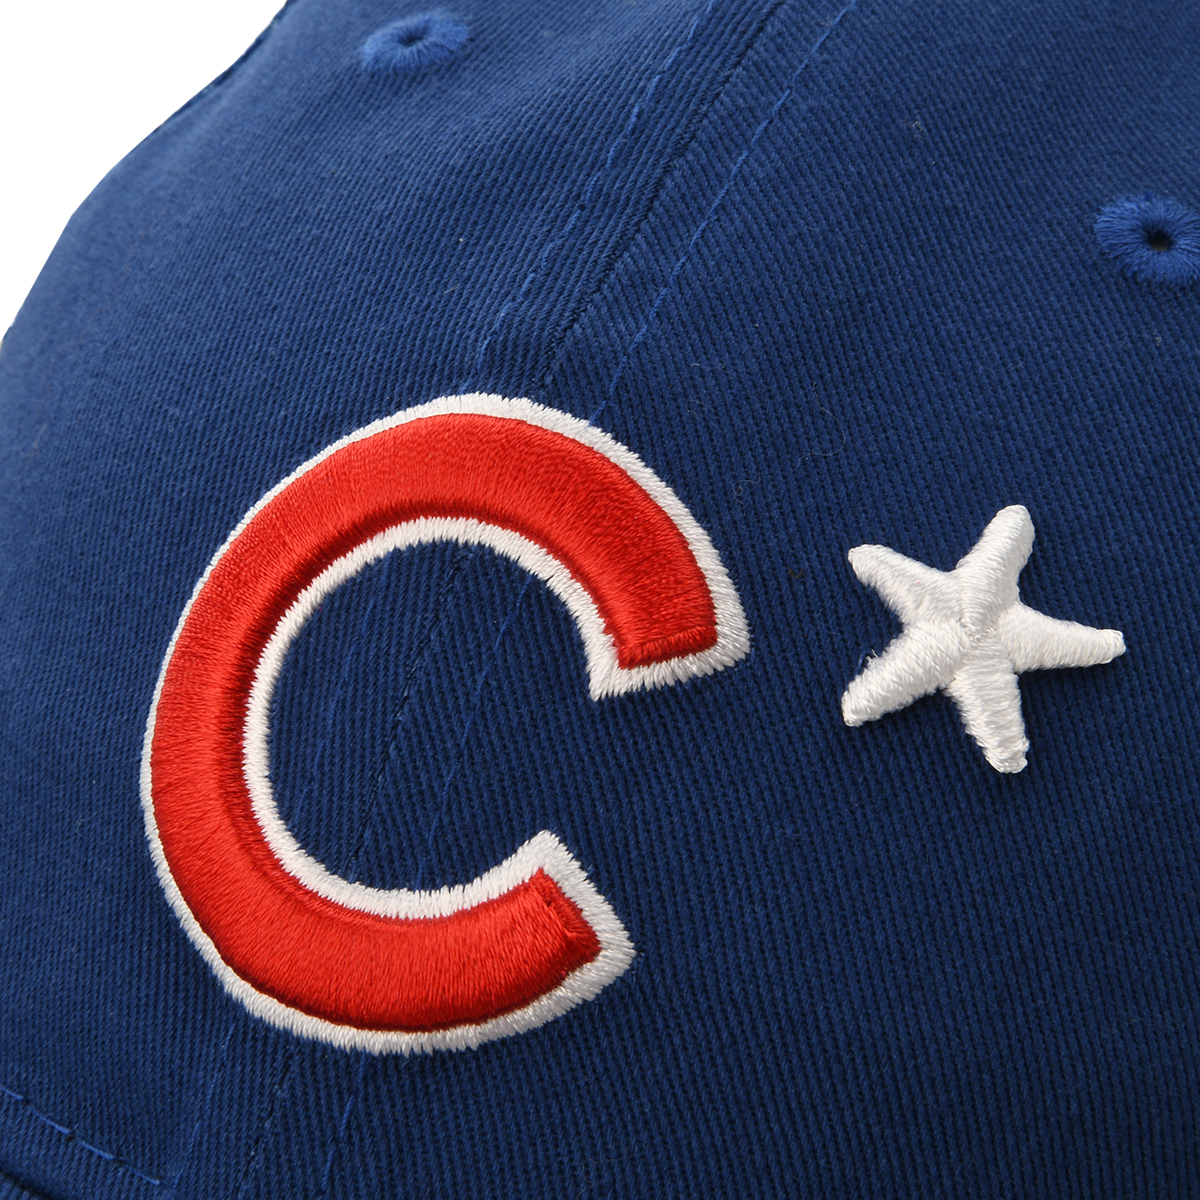 Gorra New Era 920 Patch Chicago Cubs,  image number null